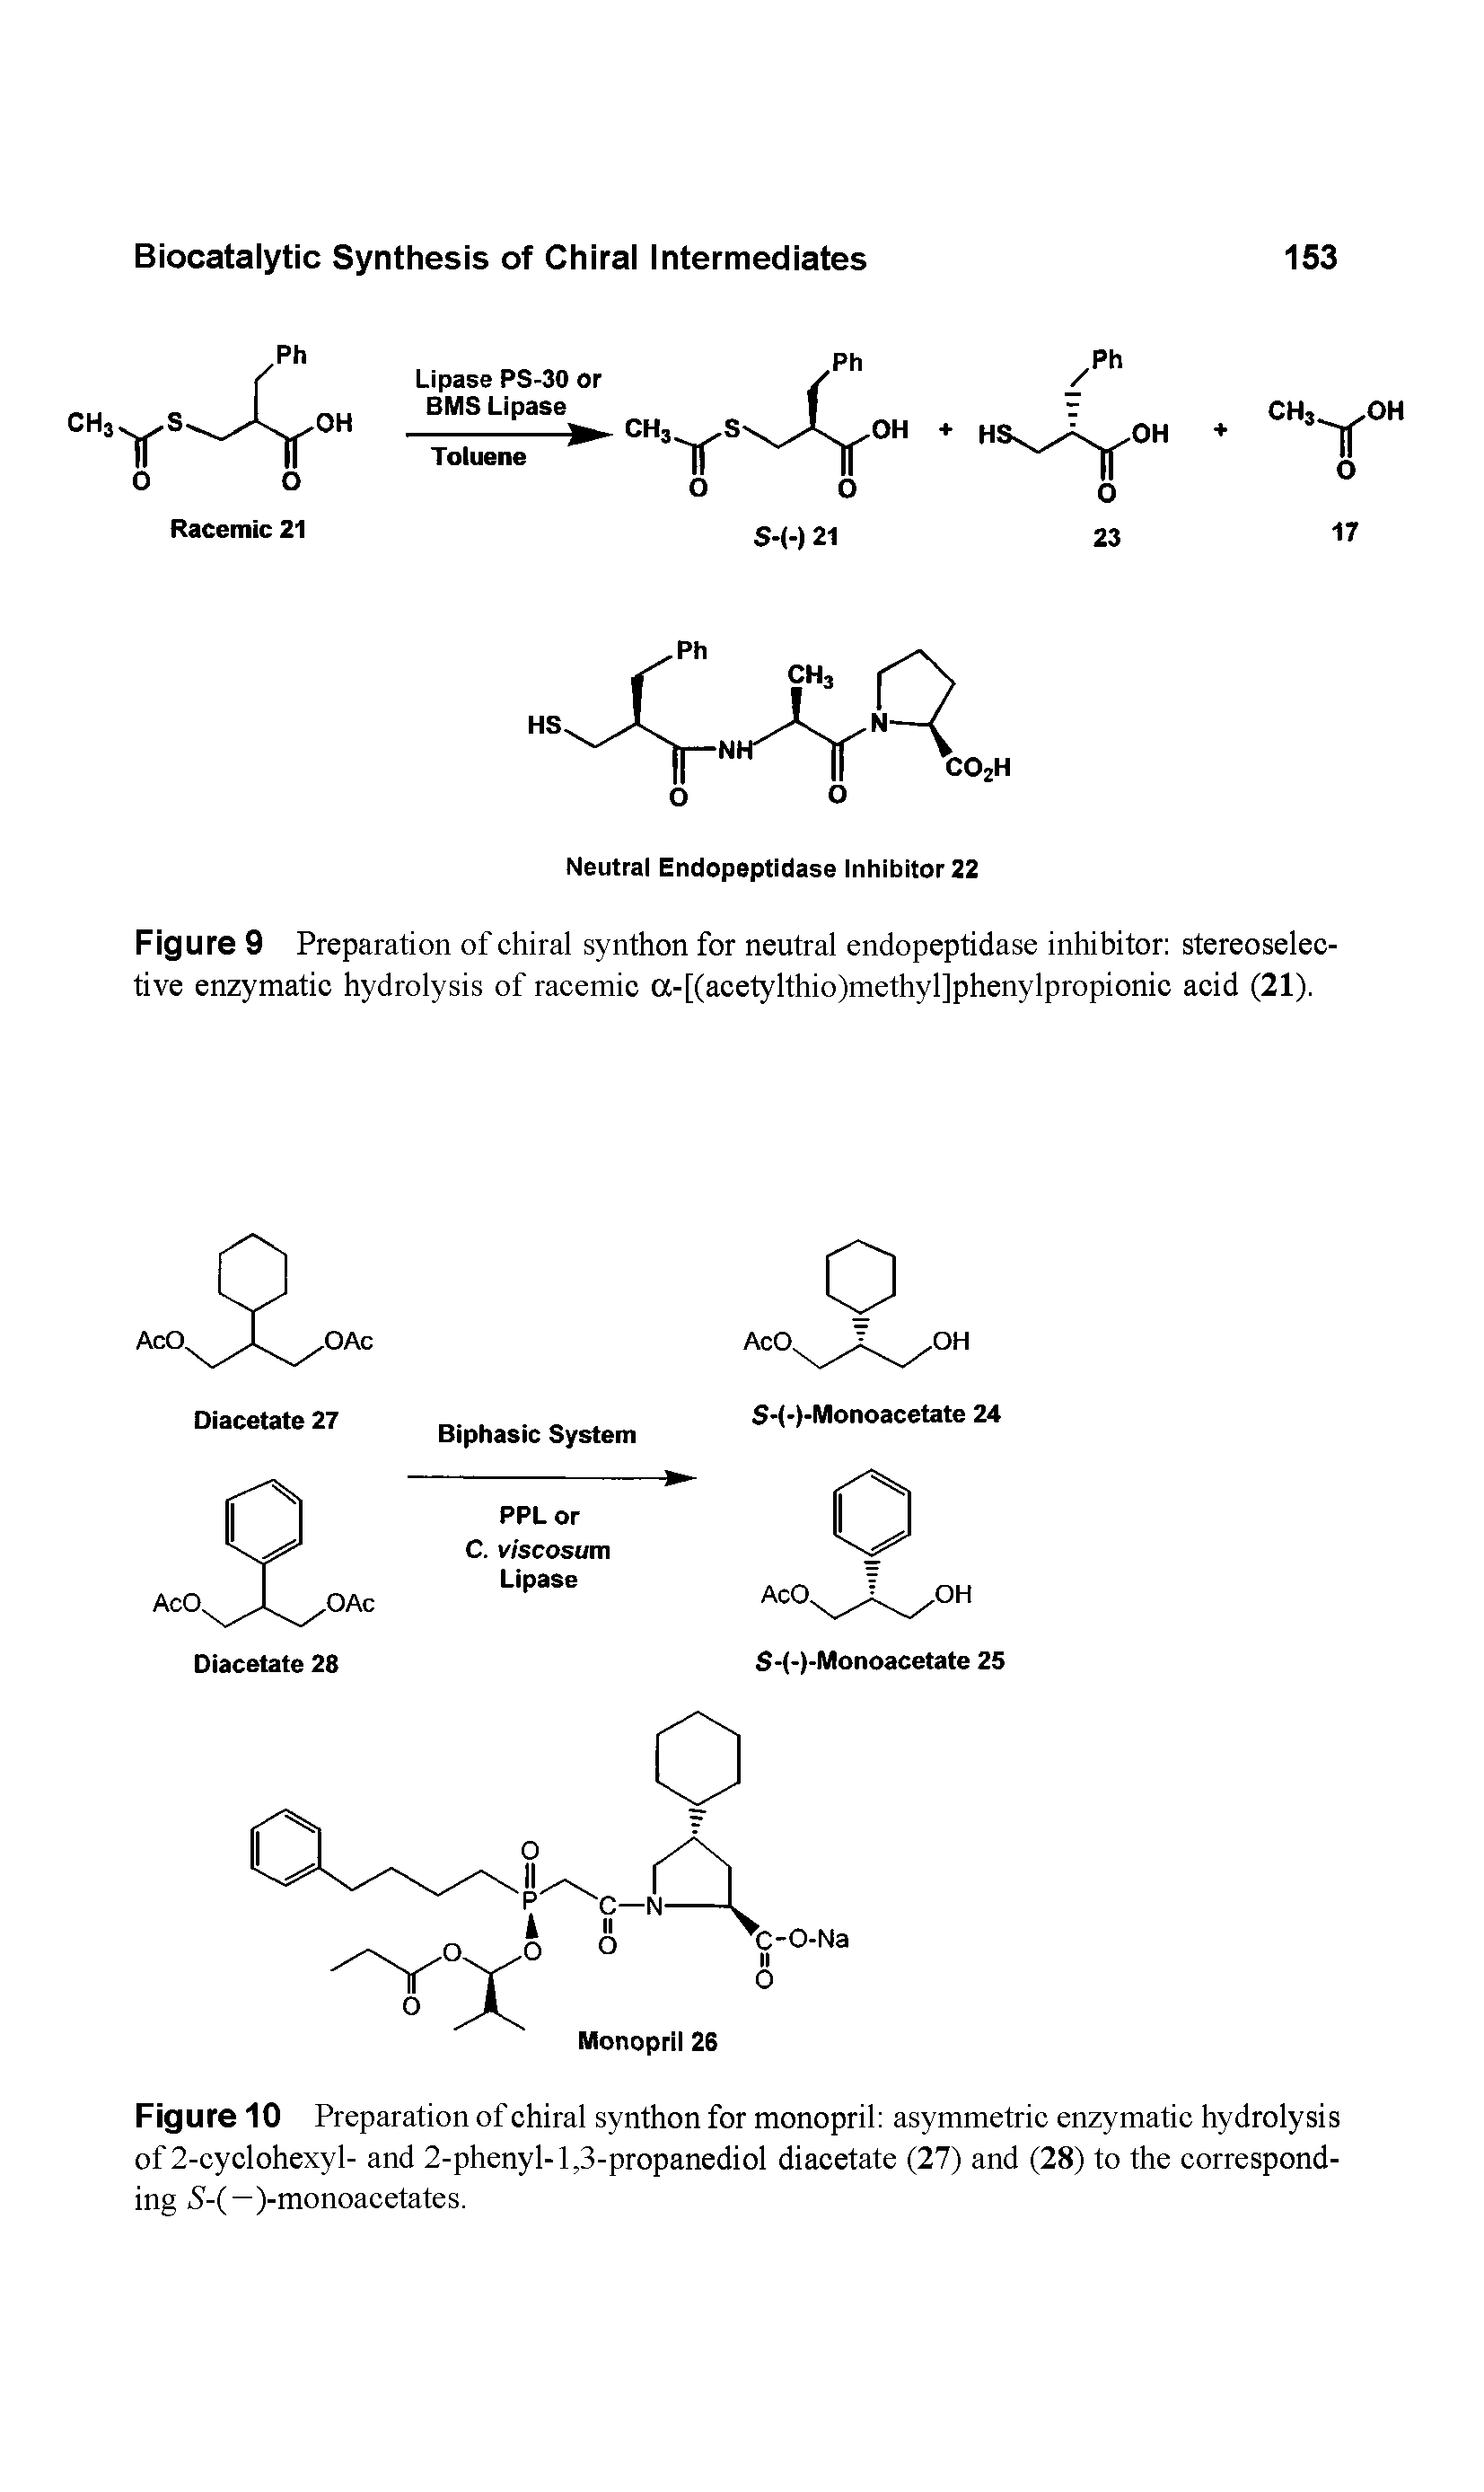 Figure 9 Preparation of chiral synthon for neutral endopeptidase inhibitor stereoselective enzymatic hydrolysis of racemic ot-[(acetylthio)methyl]phenylpropionic acid (21).